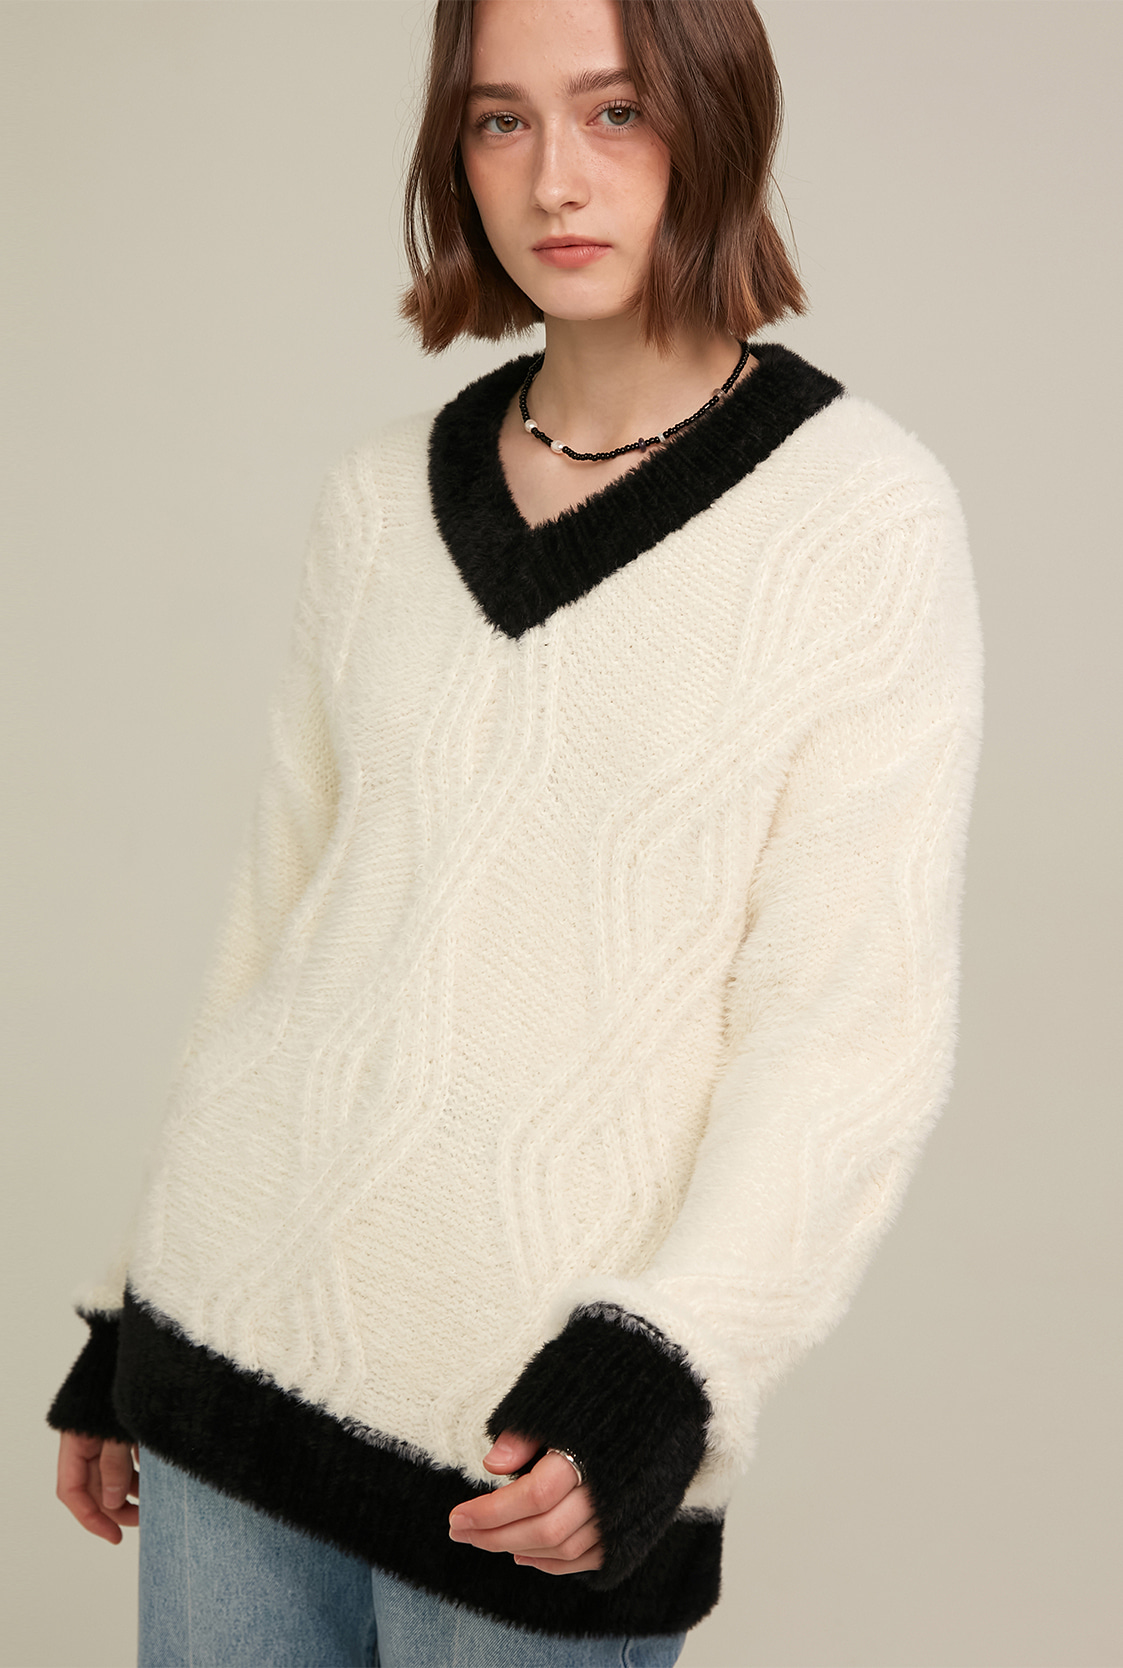 R V NECK BIG CABLE KNIT TOP_IVORY